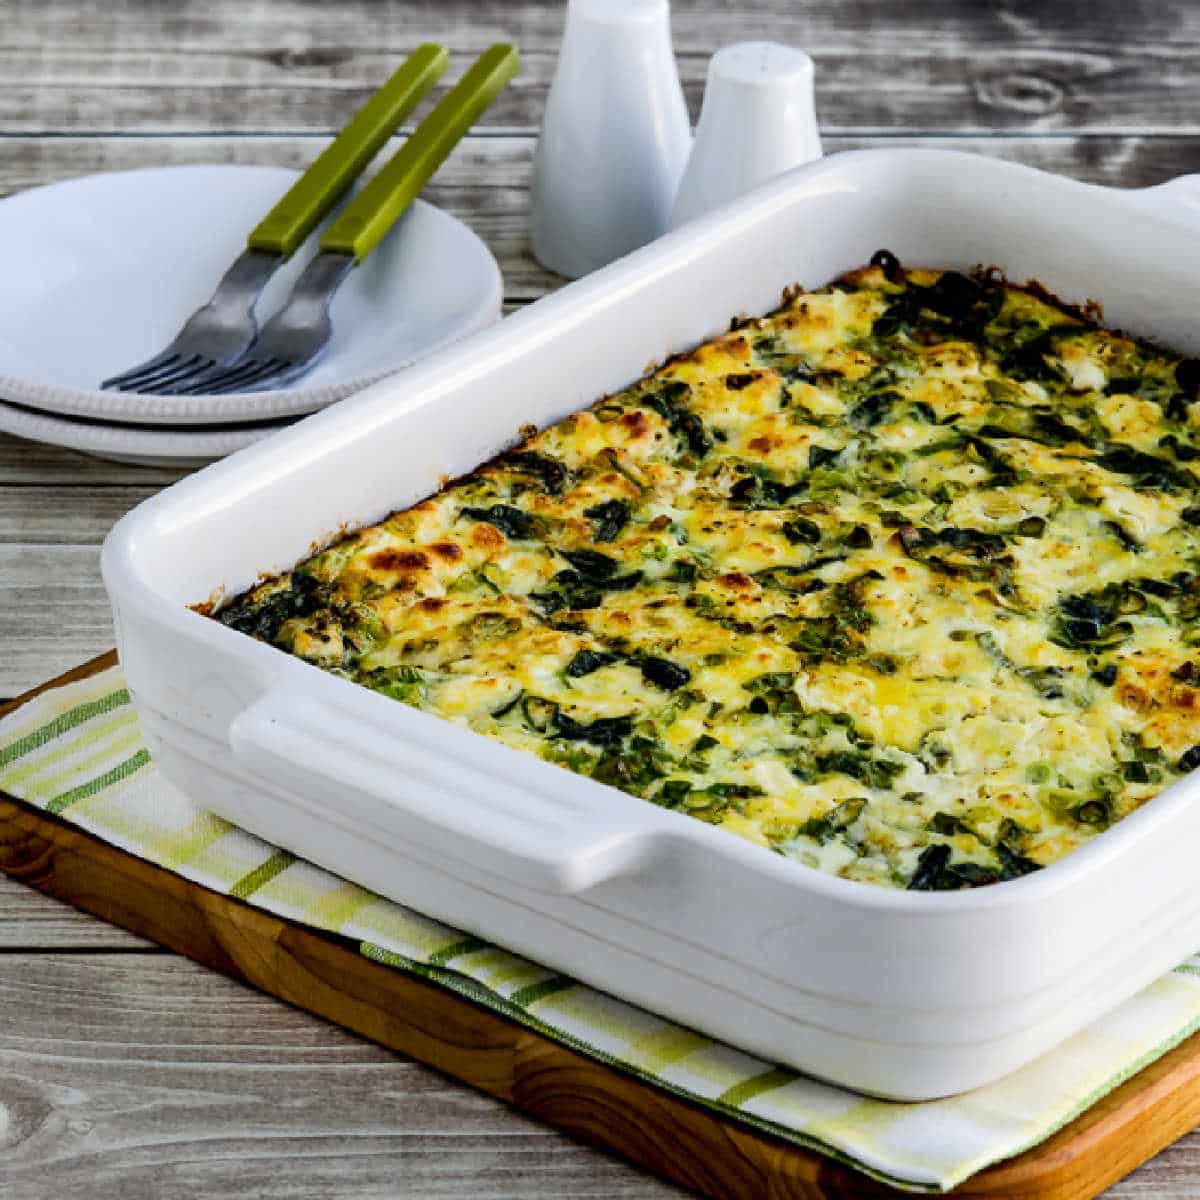 square image for Breakfast Casserole with Spinach and Goat Cheese shown in baking dish.